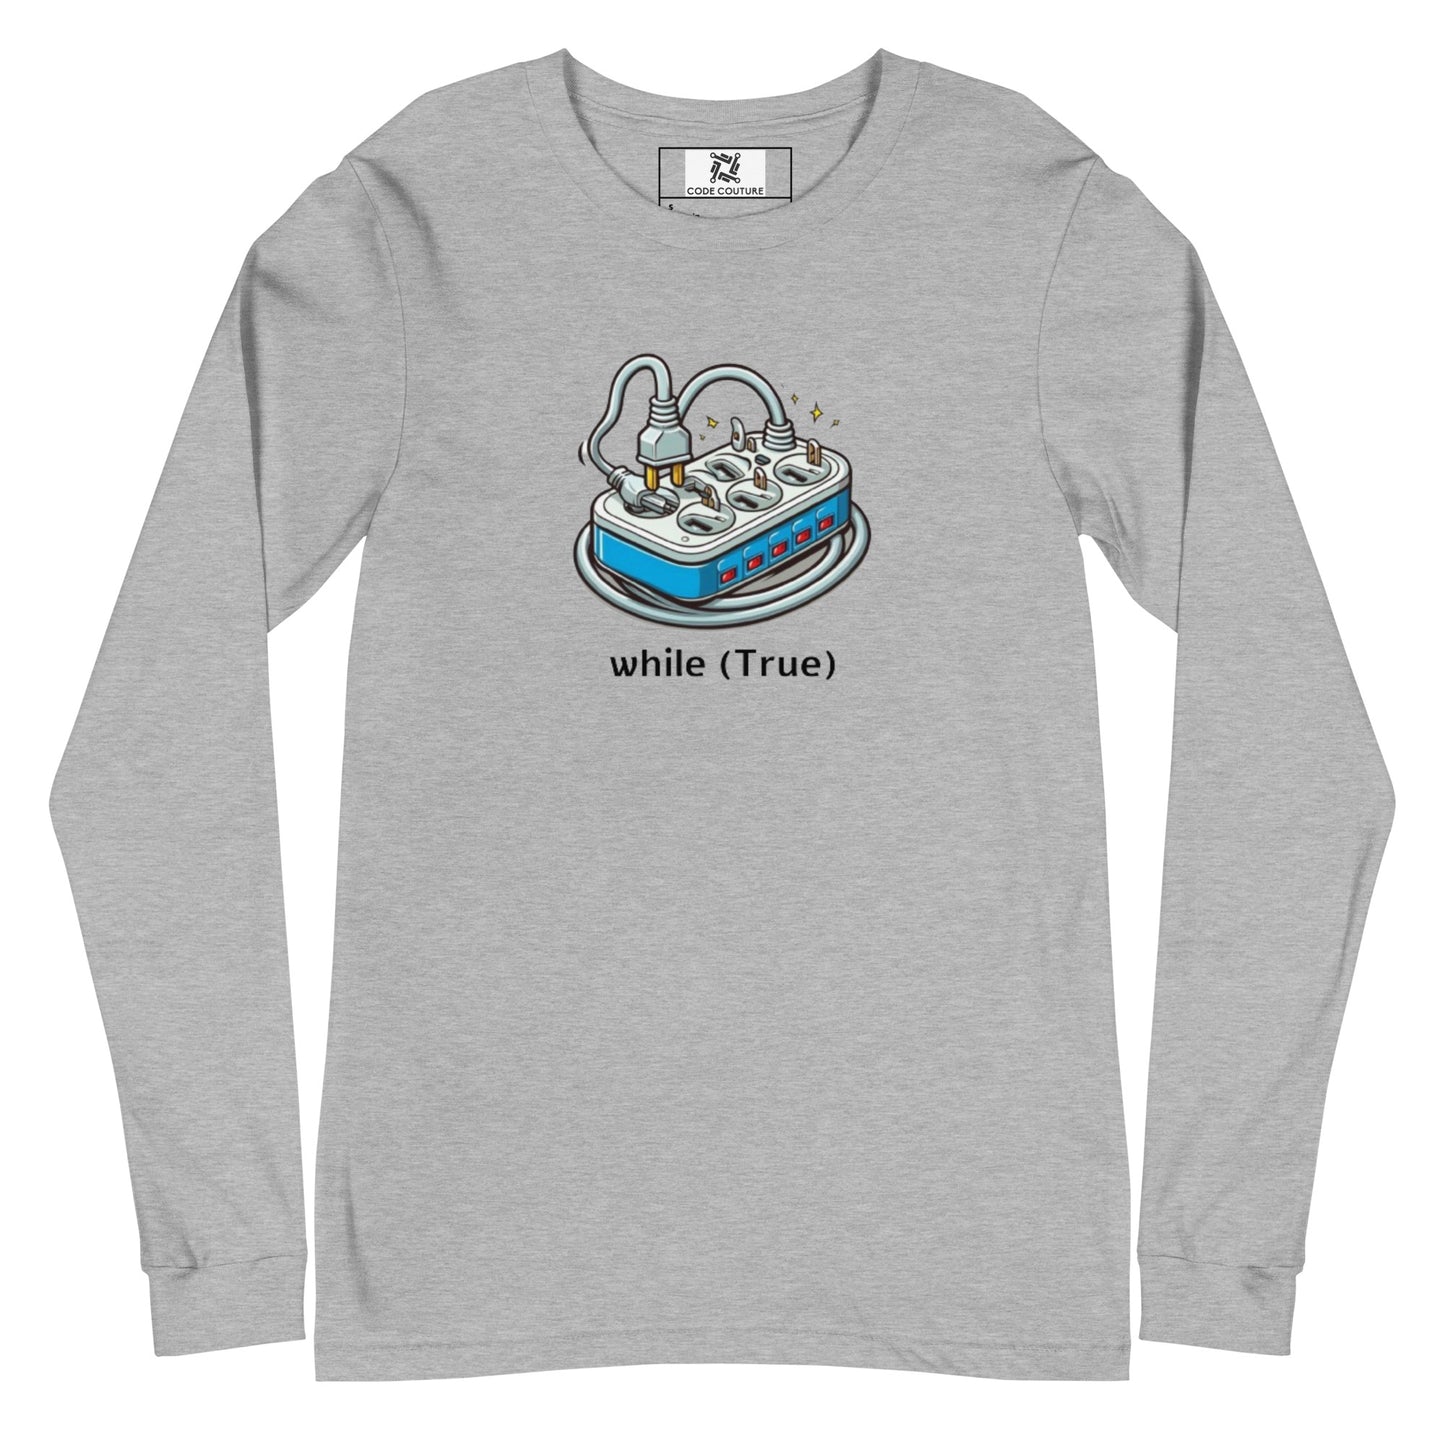 While True Long Sleeve